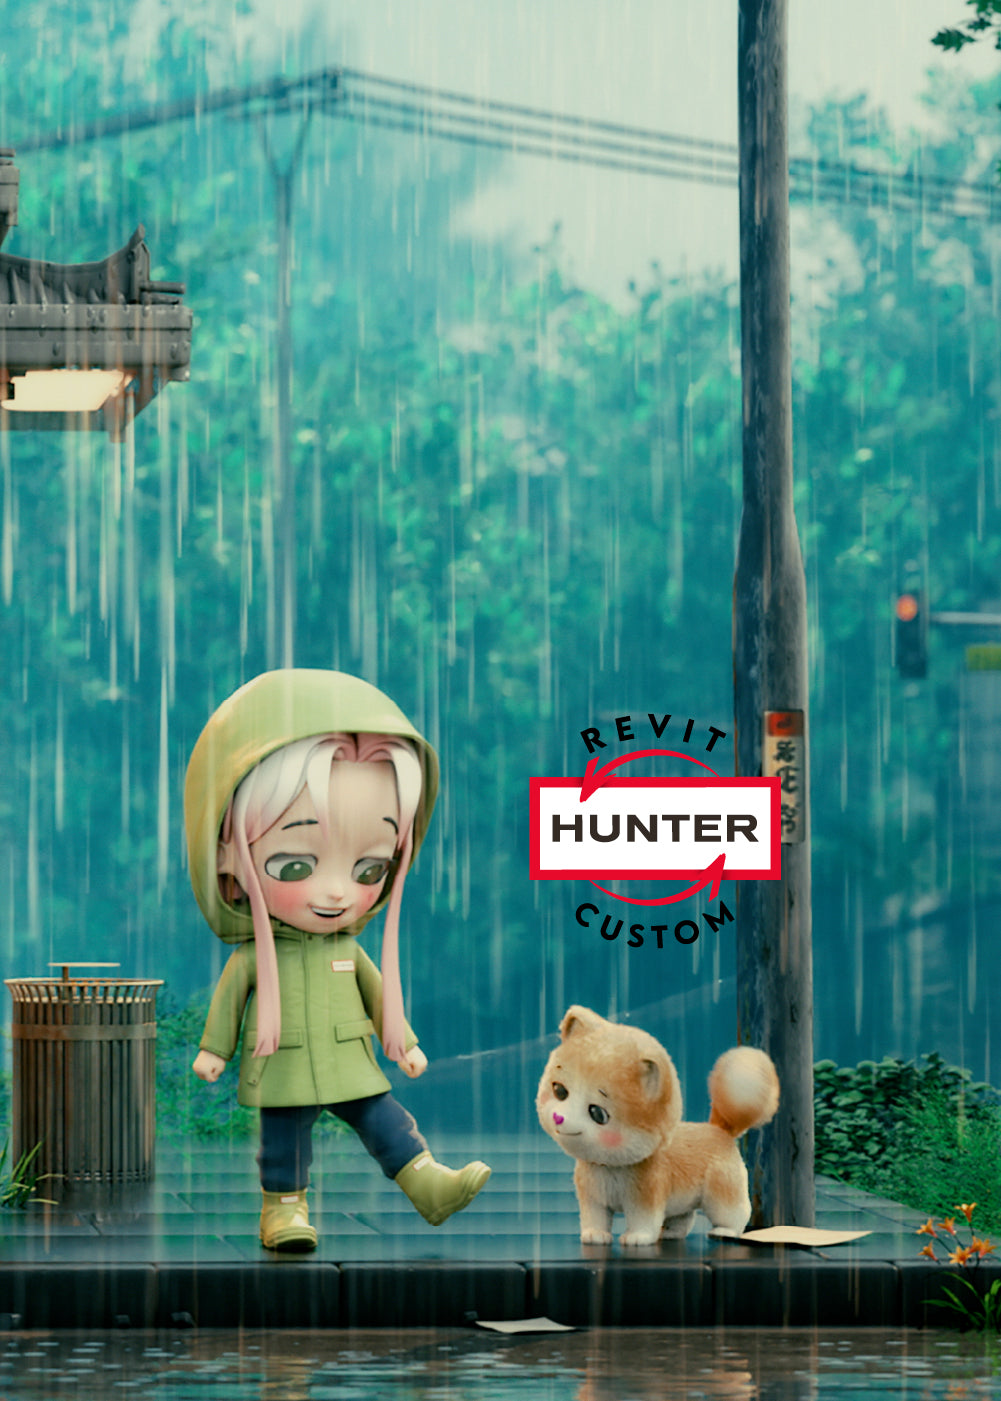 Hunter Boots - Hunter Boots Official Online Store